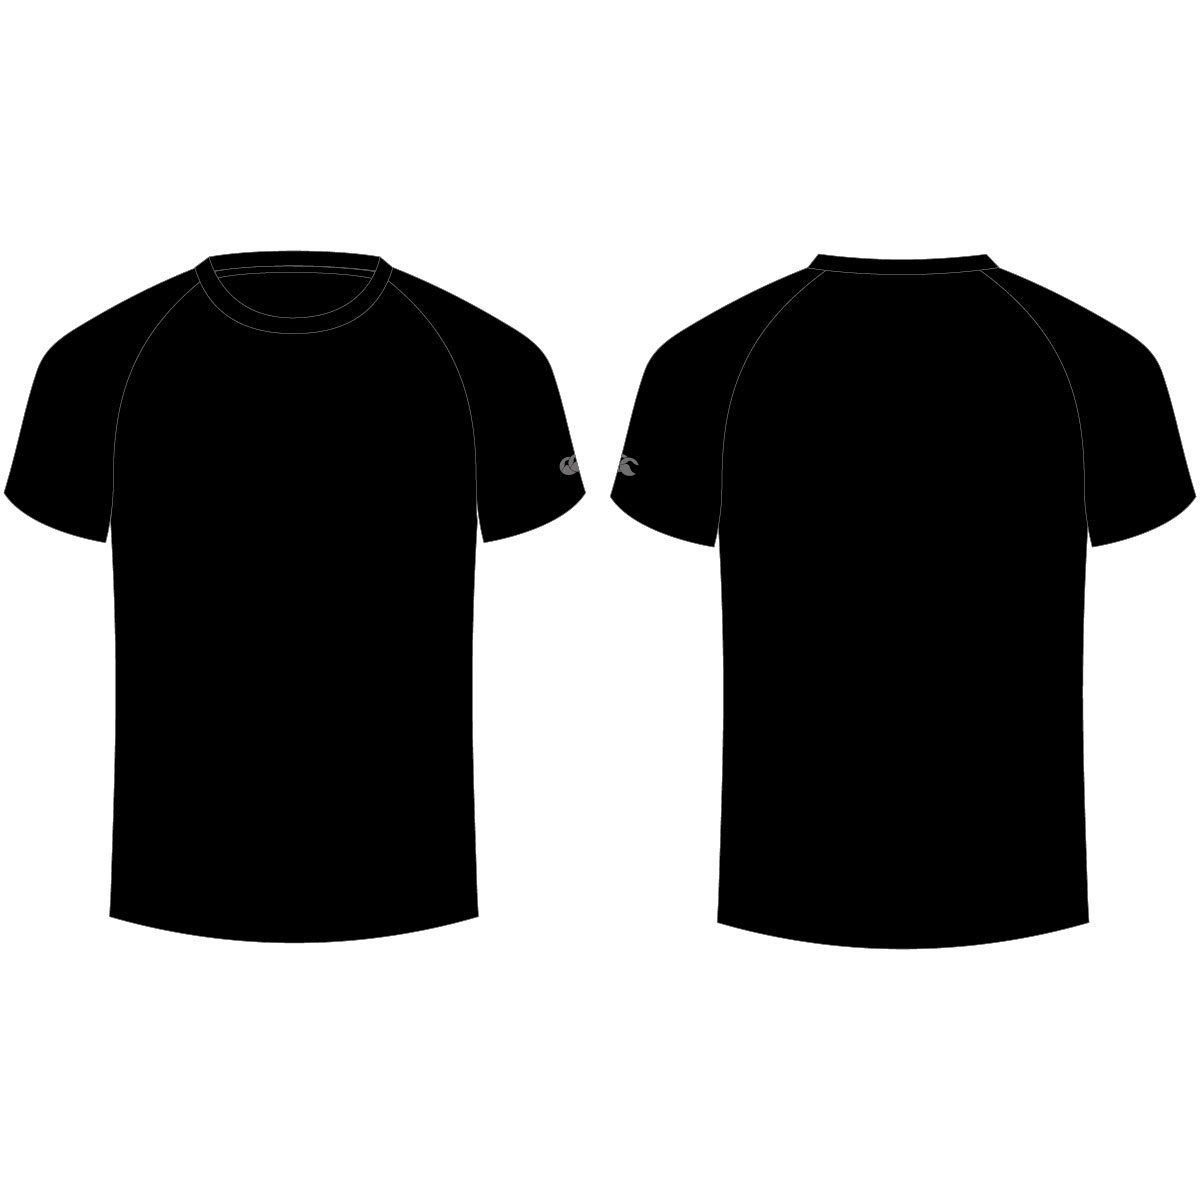 Plain Black T Shirt Front And Back Template